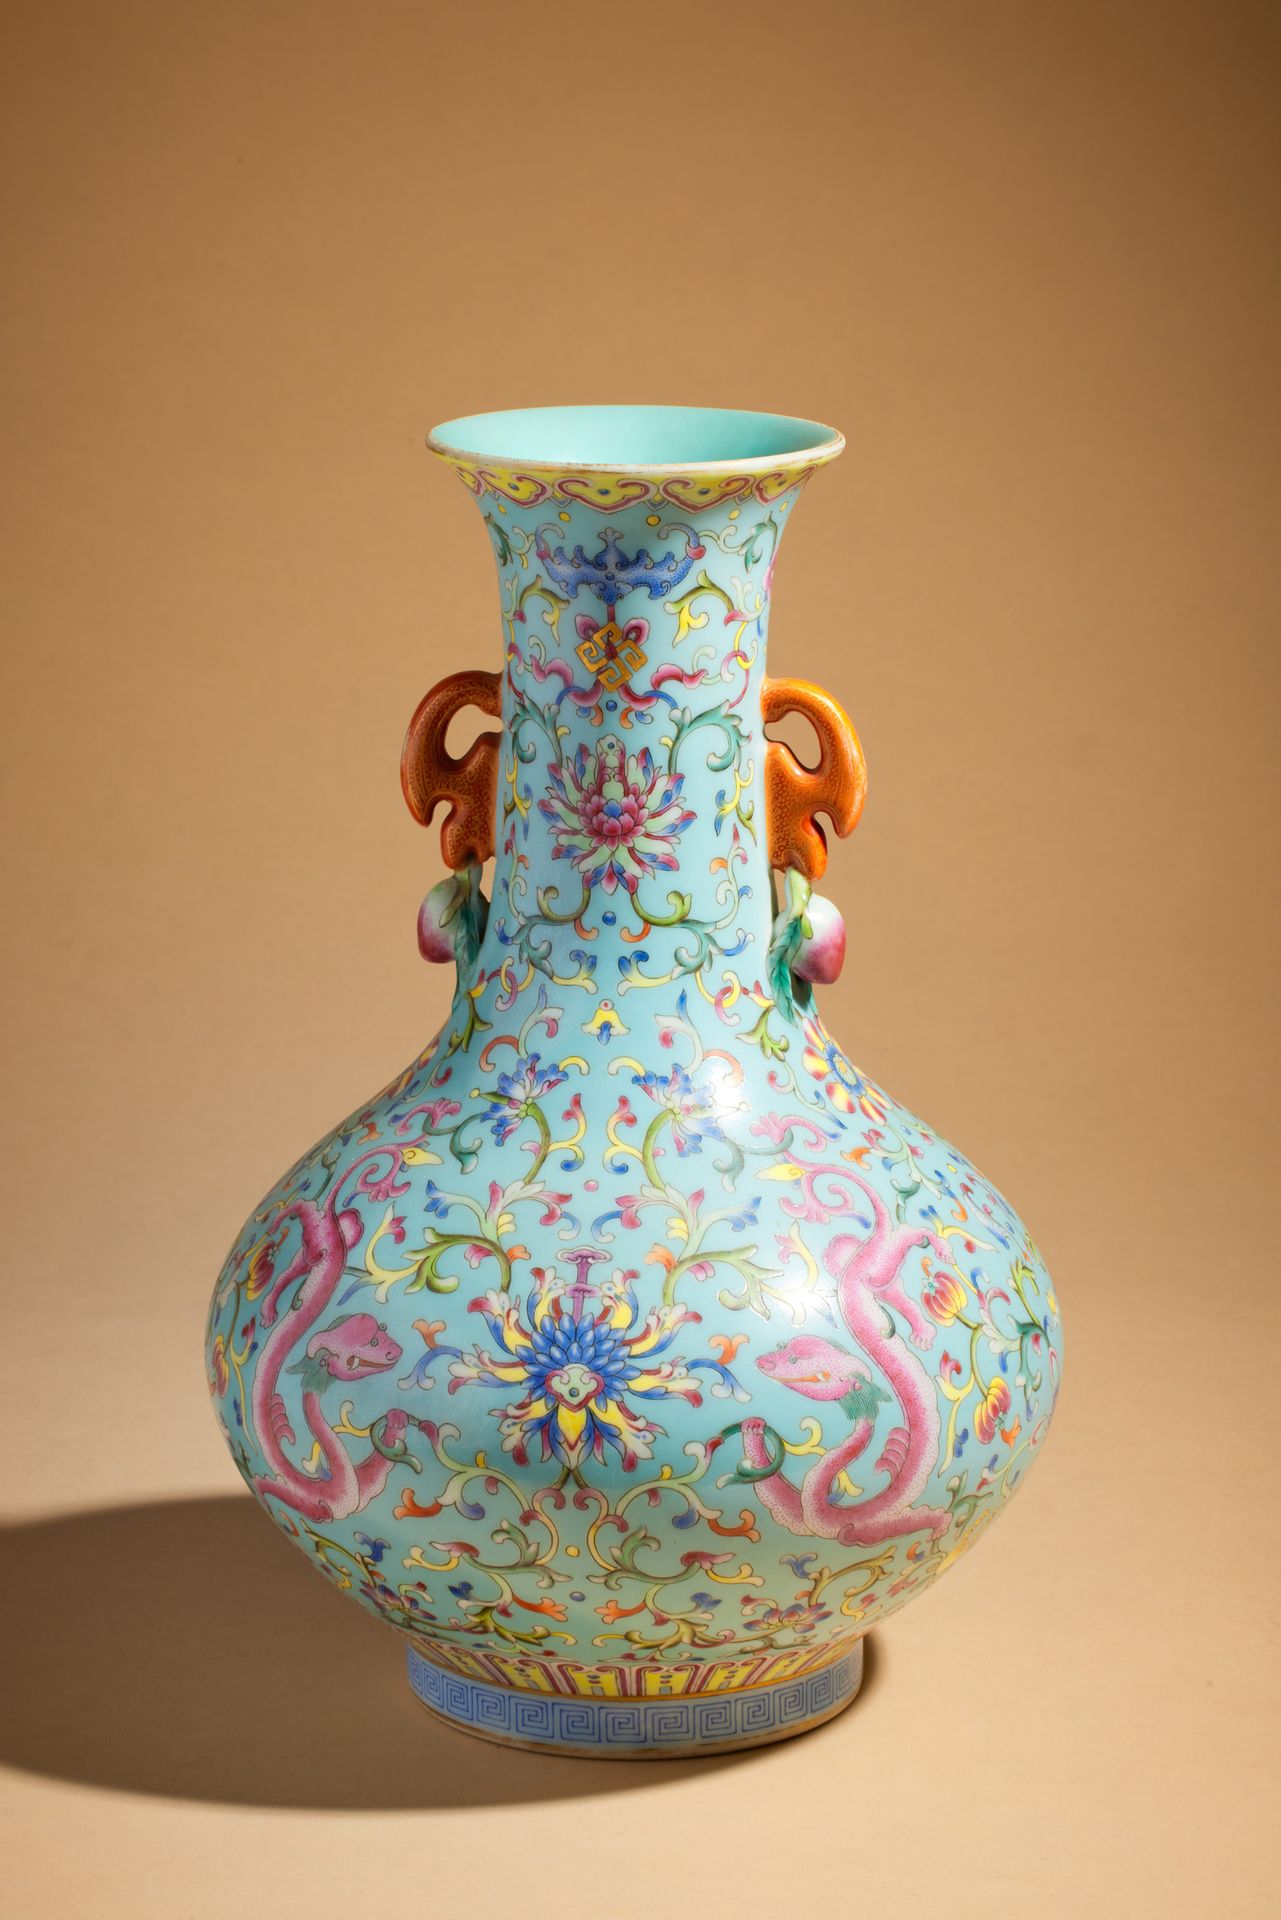 Null * CHINA - 20th century
Bottle-shaped porcelain vase enamelled in the famill&hellip;